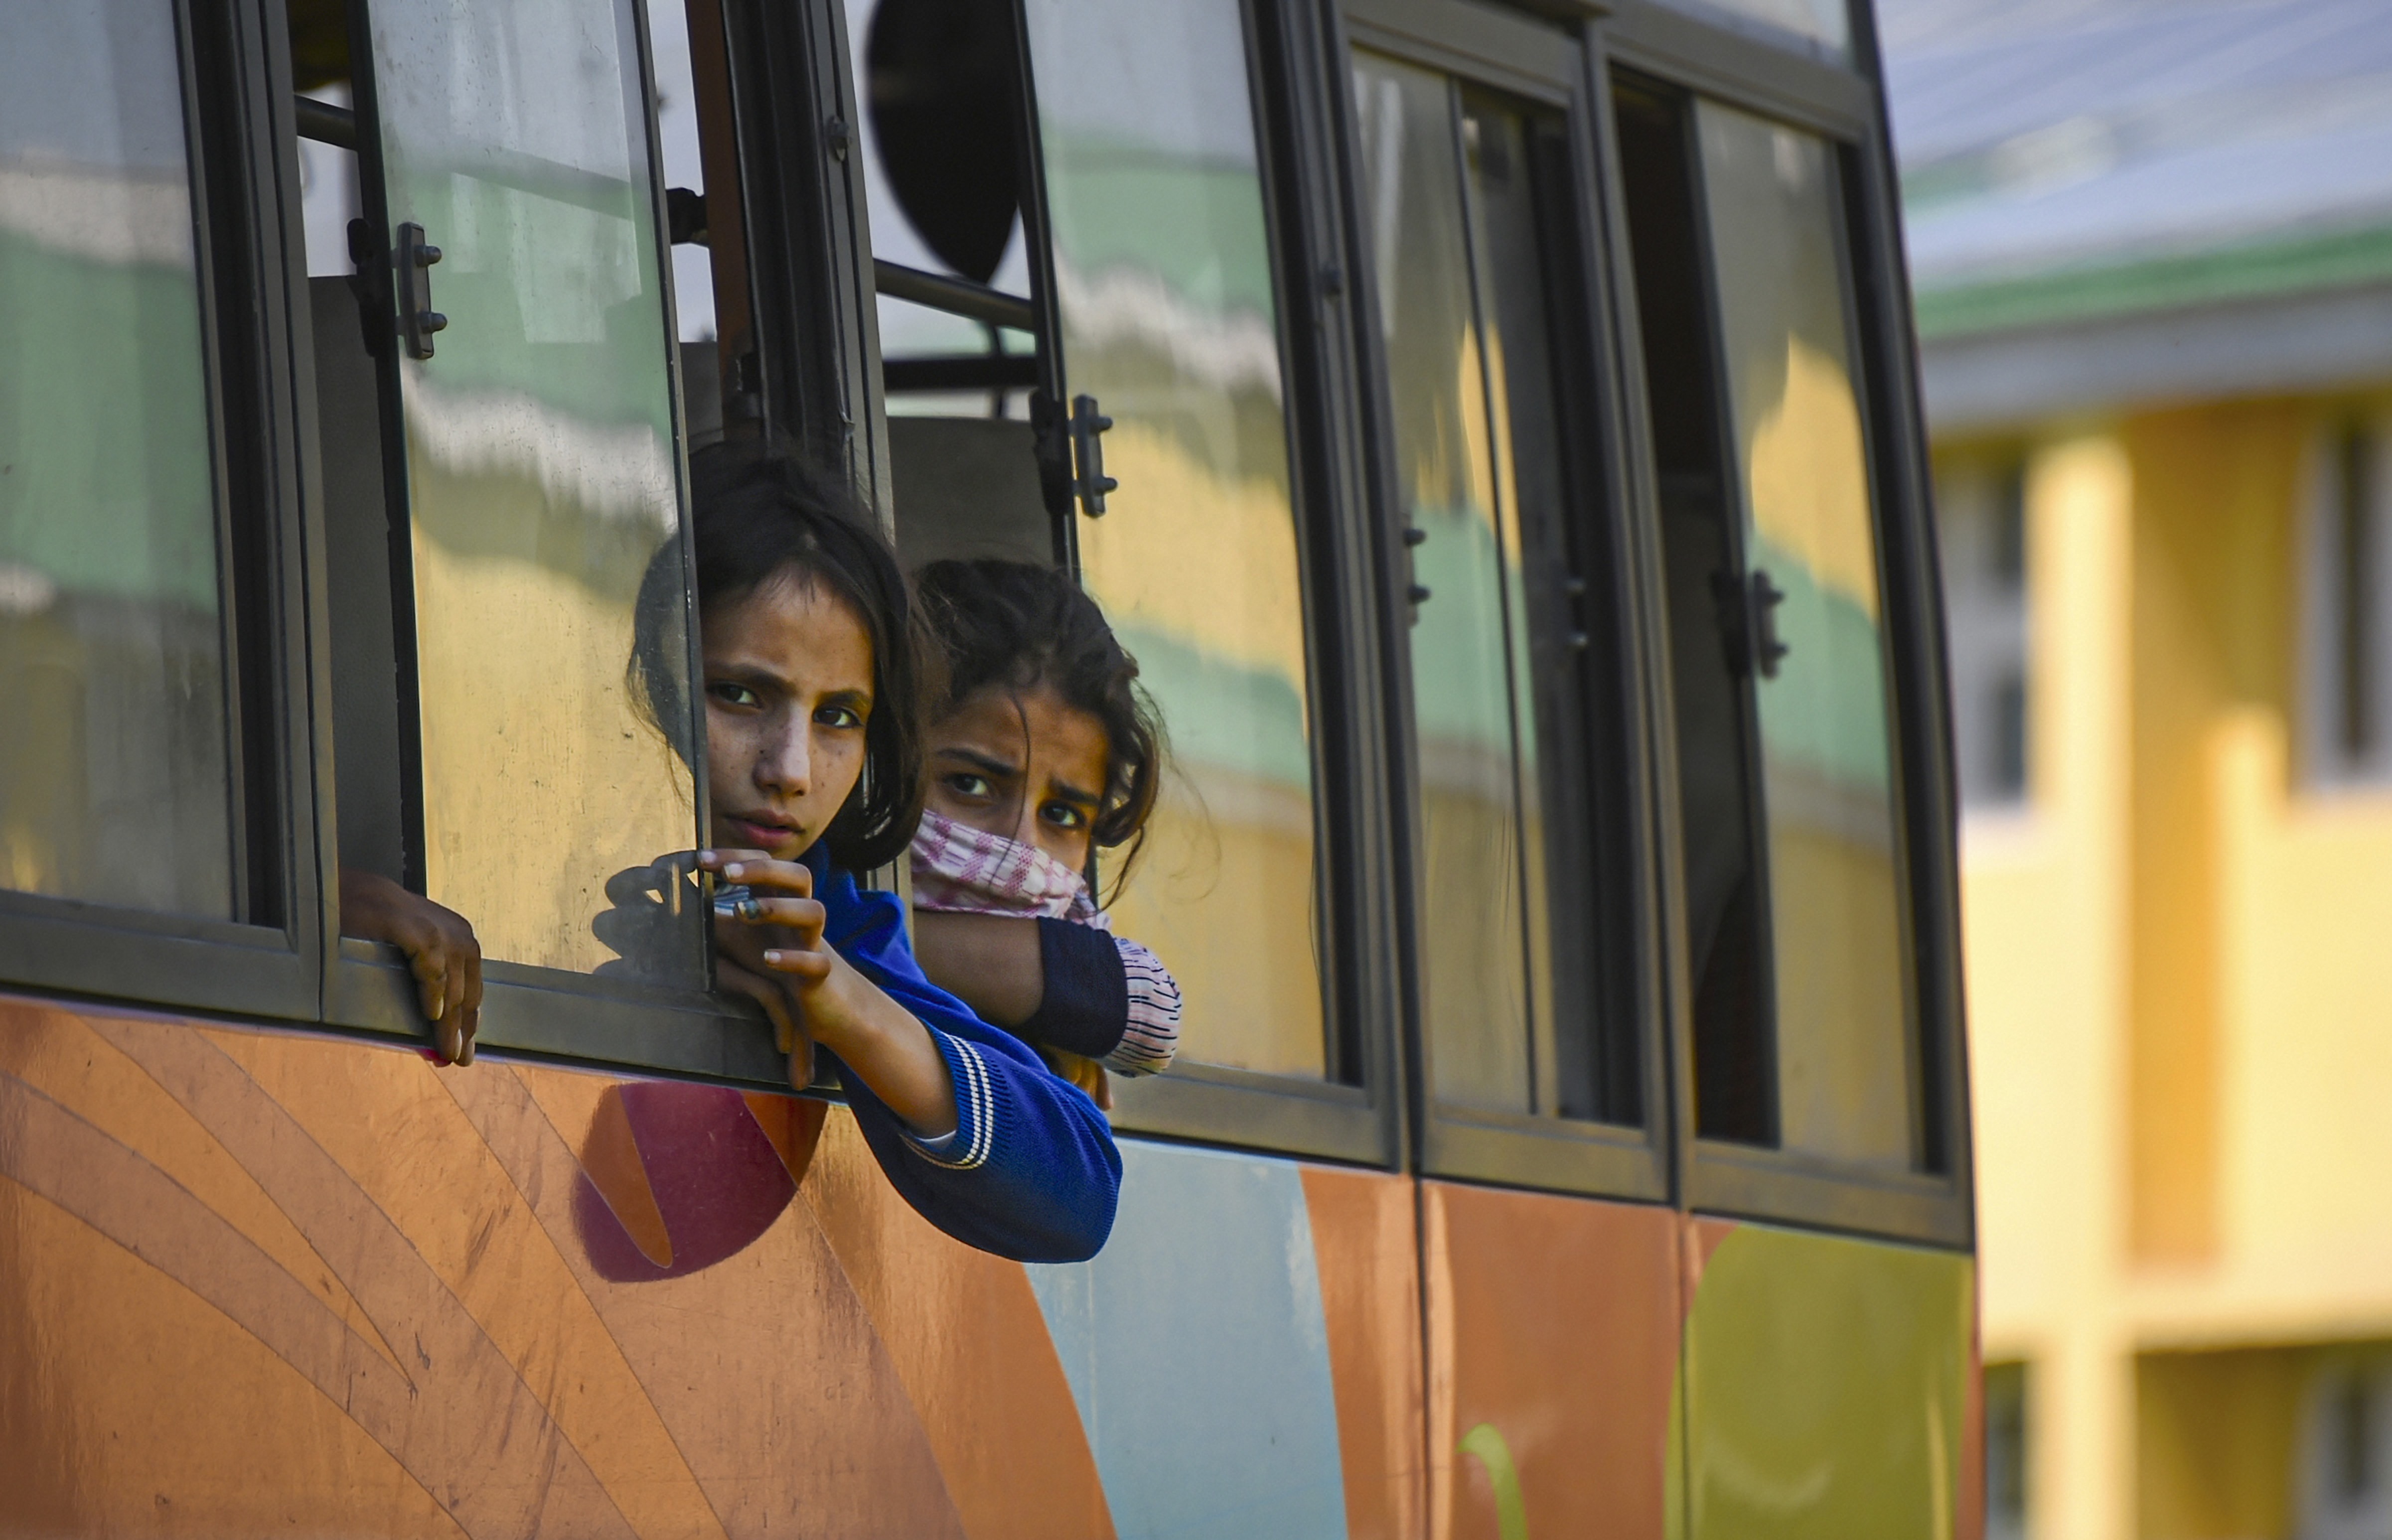 Girls, who were stranded along with their families in Haryana, look through the window of a bus after arriving at Tourist Reception Center, during the nationwide Covid-19 lockdown, in Srinagar, Friday, May 15, 2020.